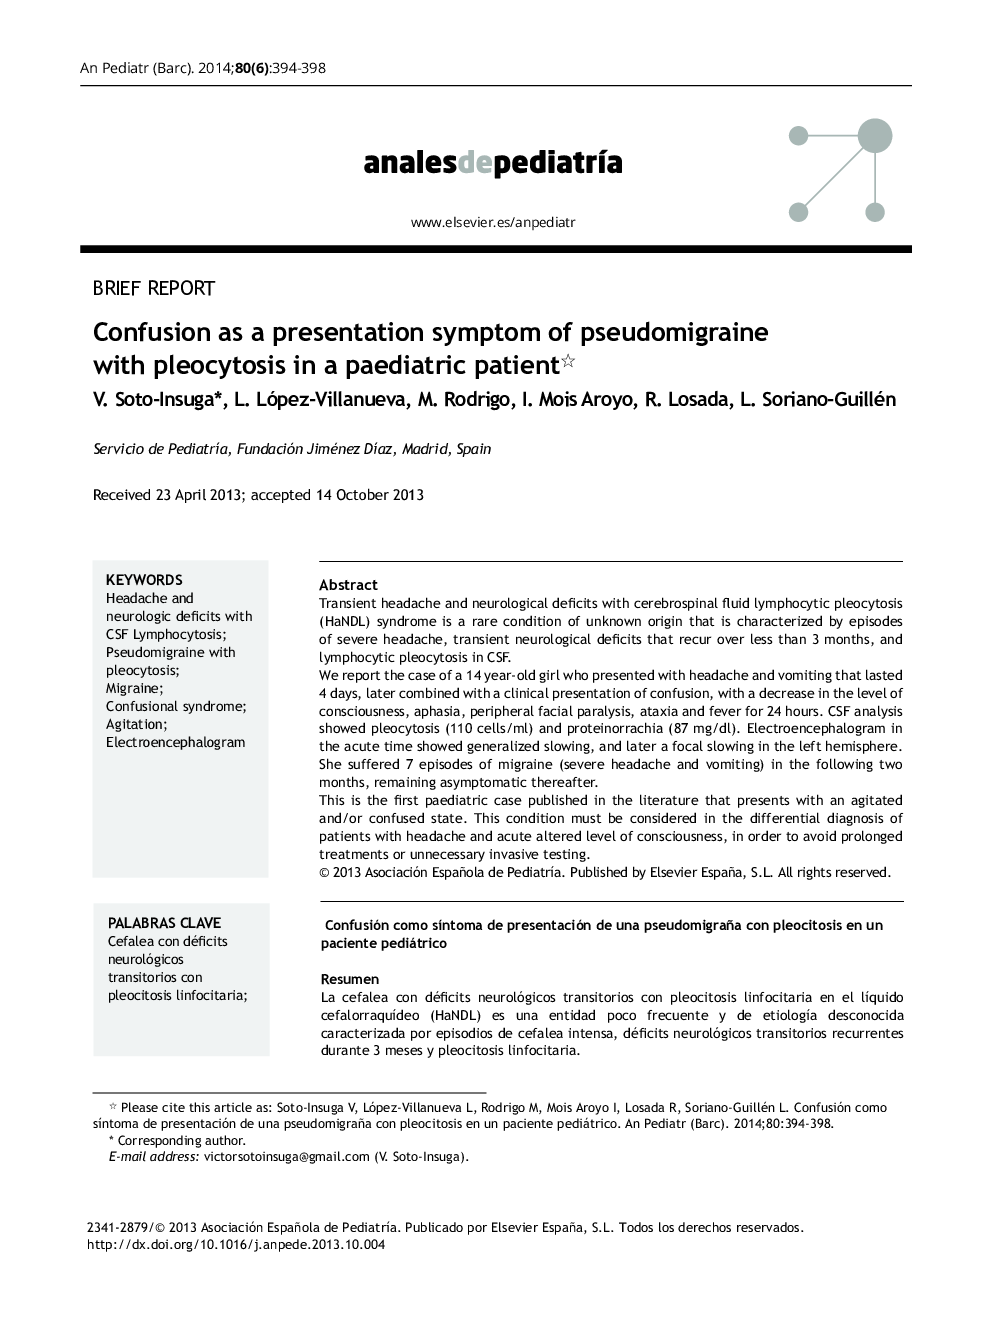 Confusion as a presentation symptom of pseudomigraine with pleocytosis in a paediatric patient 